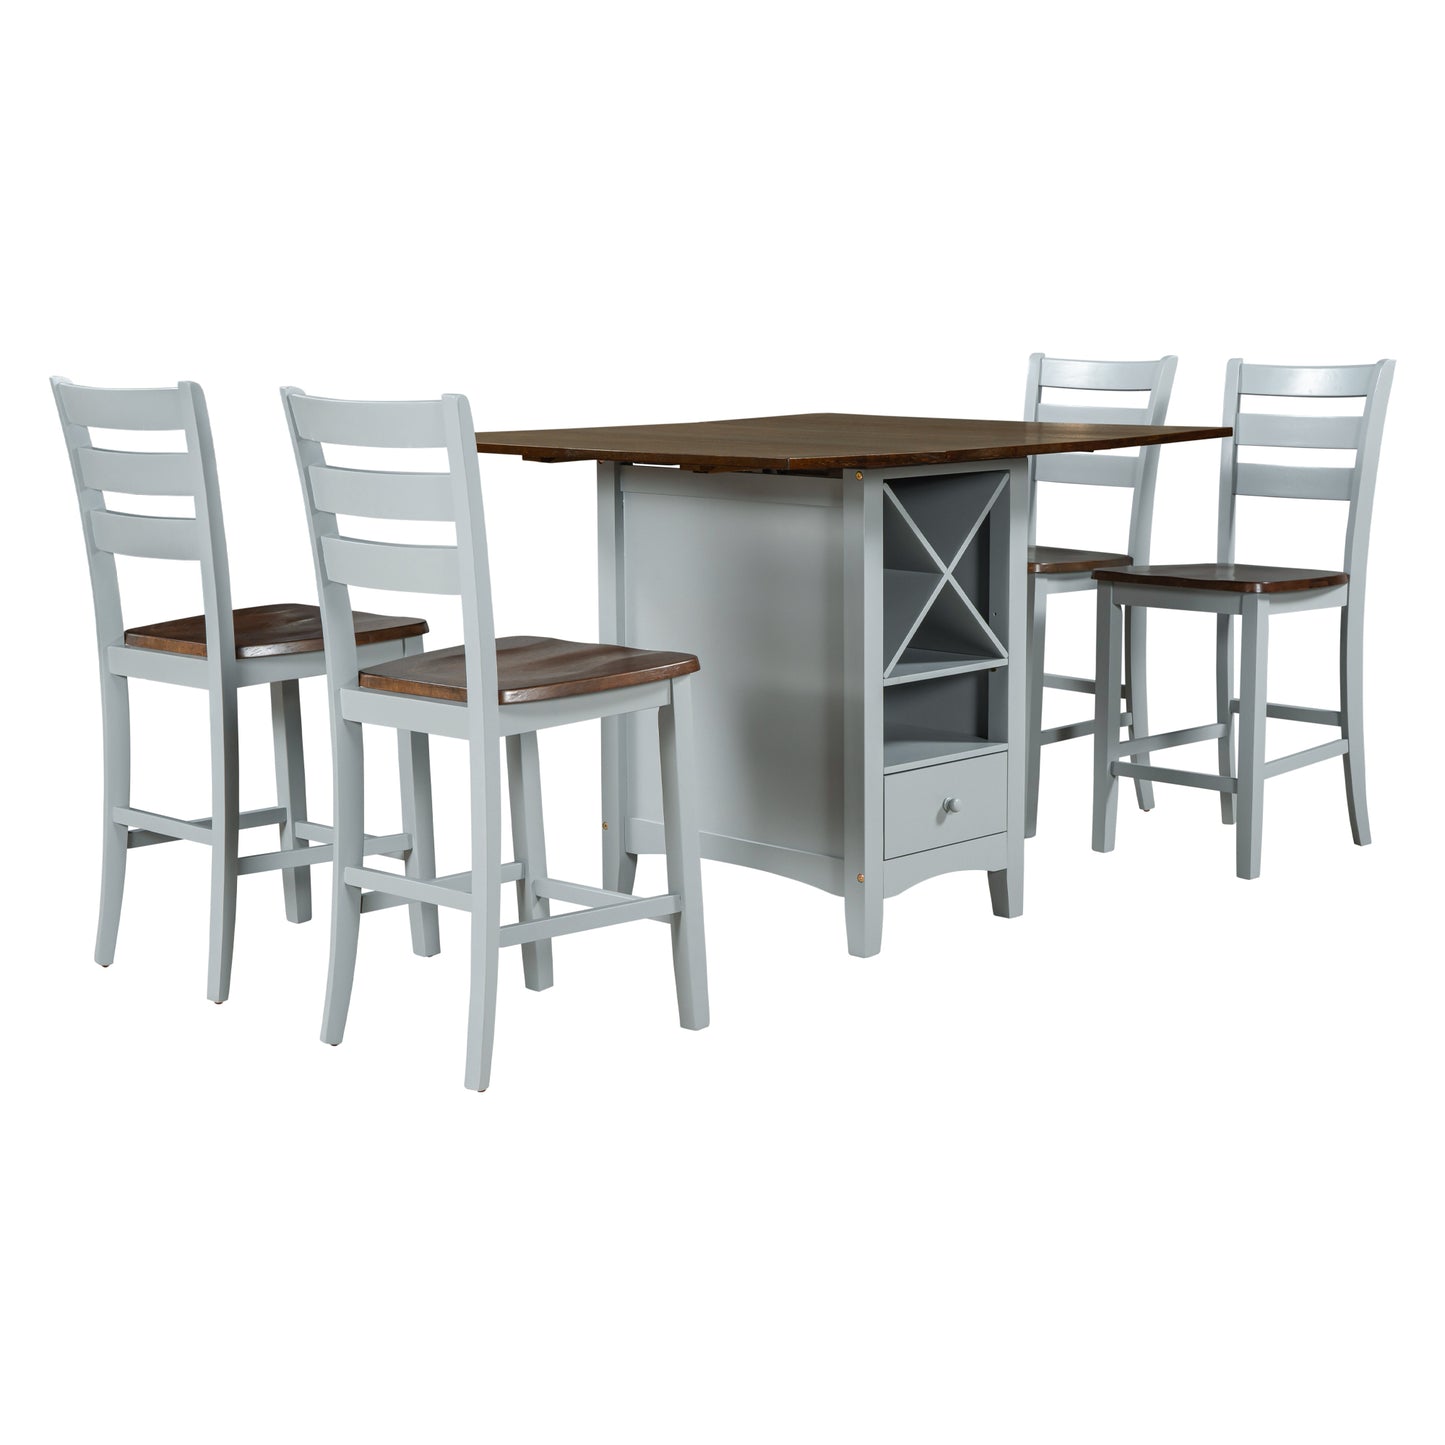 5 Piece Counter Height Farmhouse Dining Set in Gray & Cherry